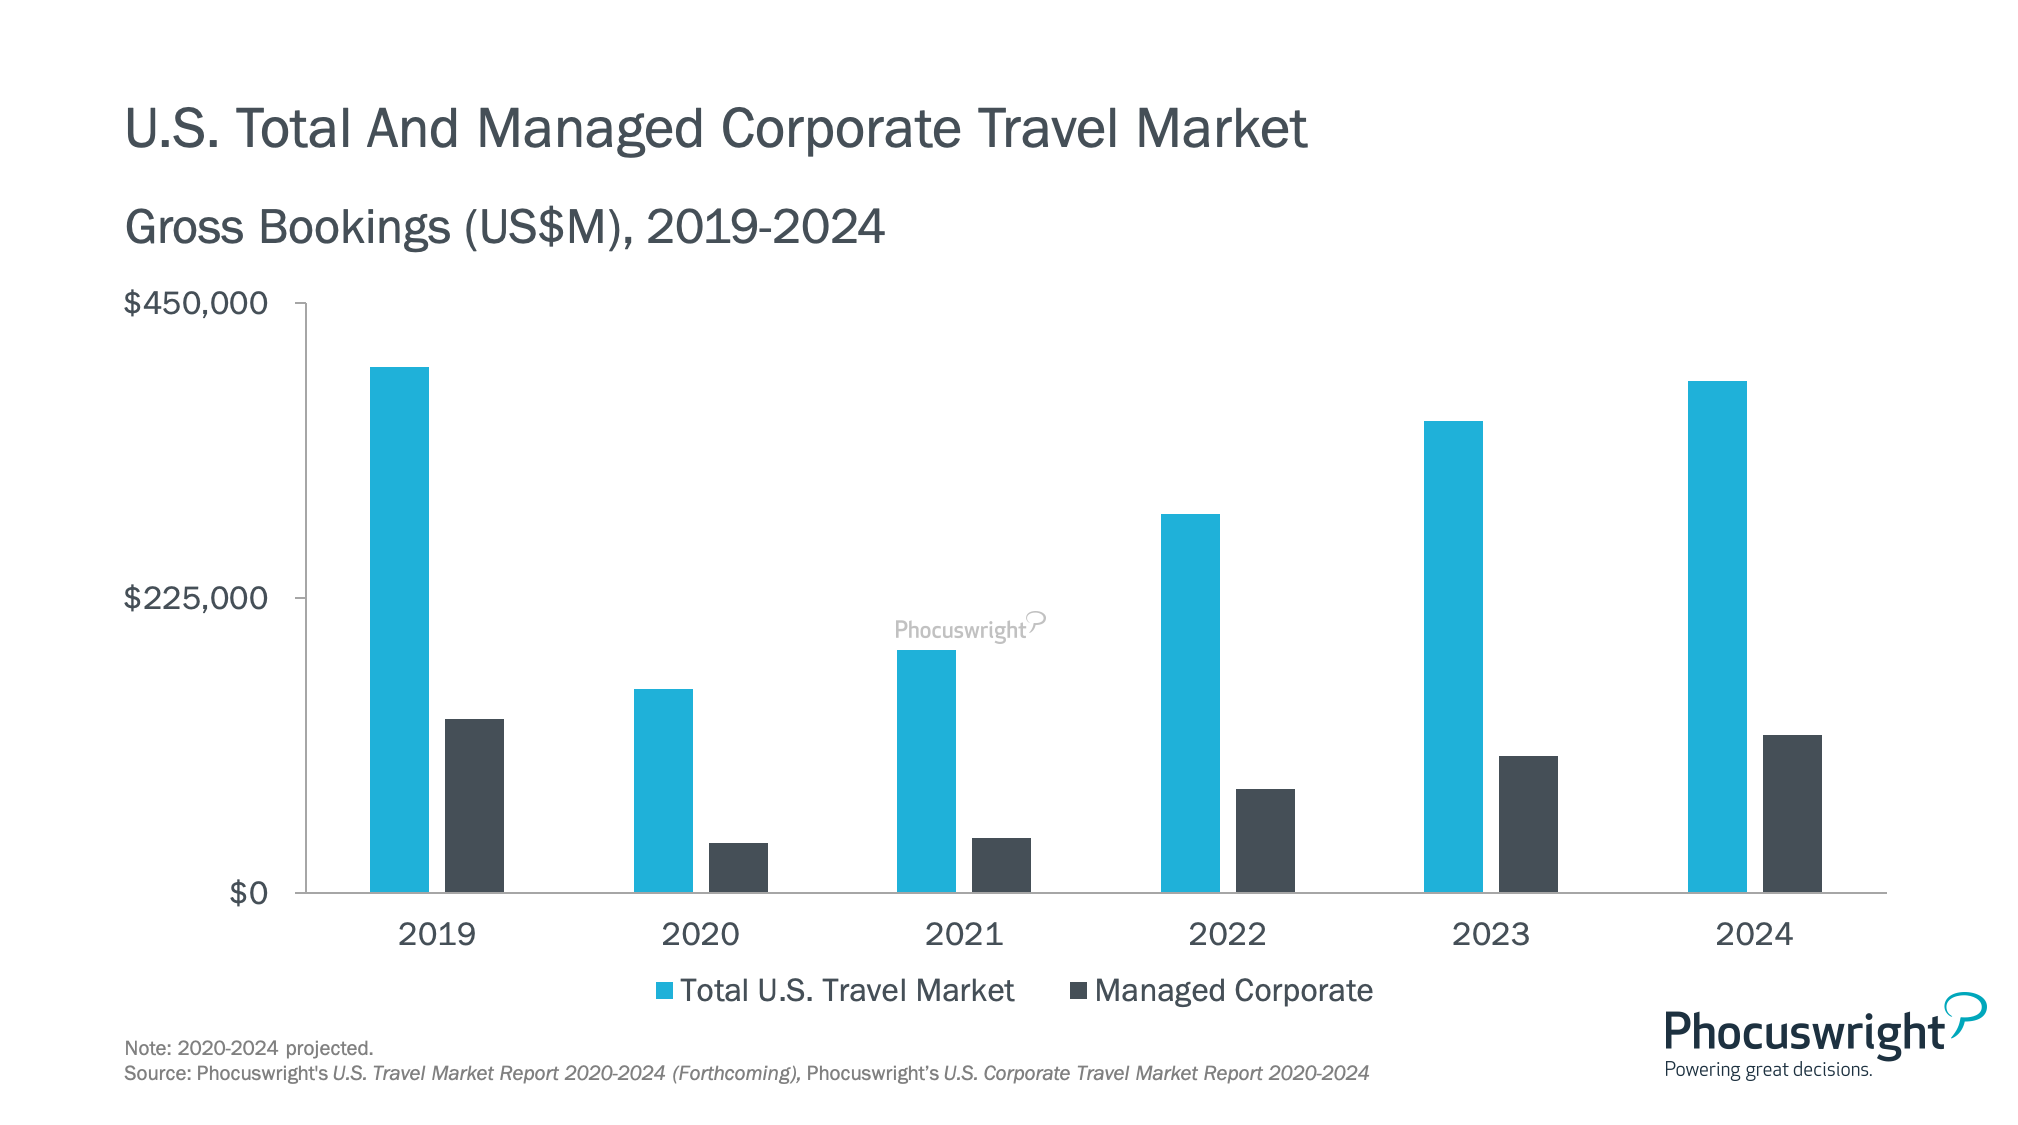 growth of business travel 20th century